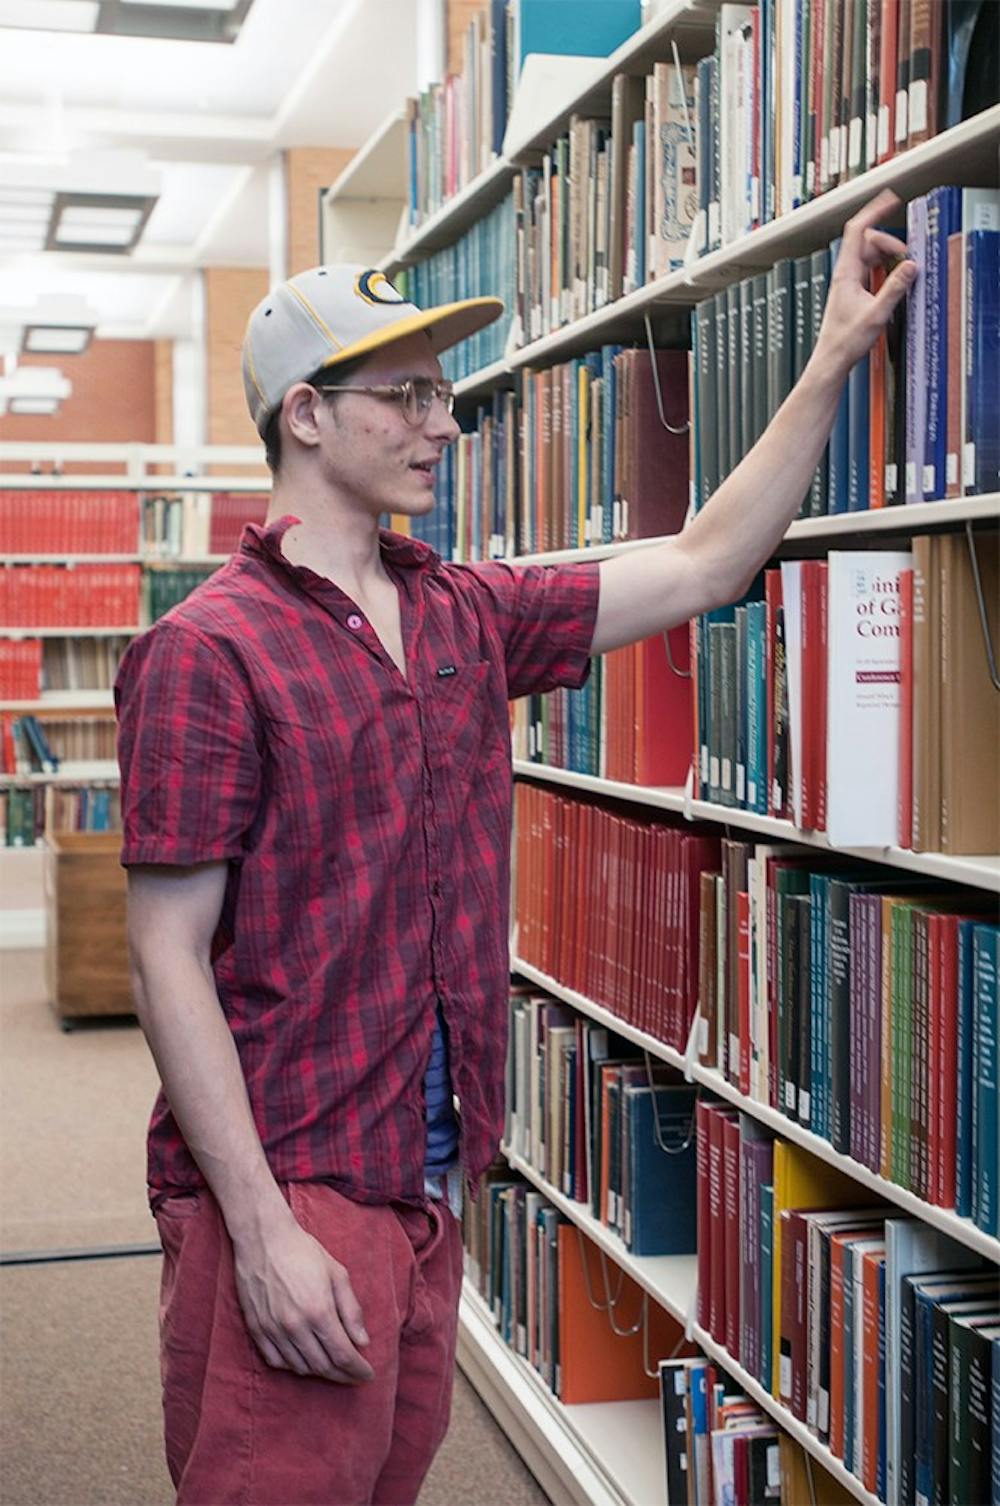 <p>Media and information junior Richie Jeczen organizes books on the book shelf May 22, 2015 while working in the Engineering Library. Jeczen studies here during his free time while working late shifts. Asha Johnson/The State News</p>